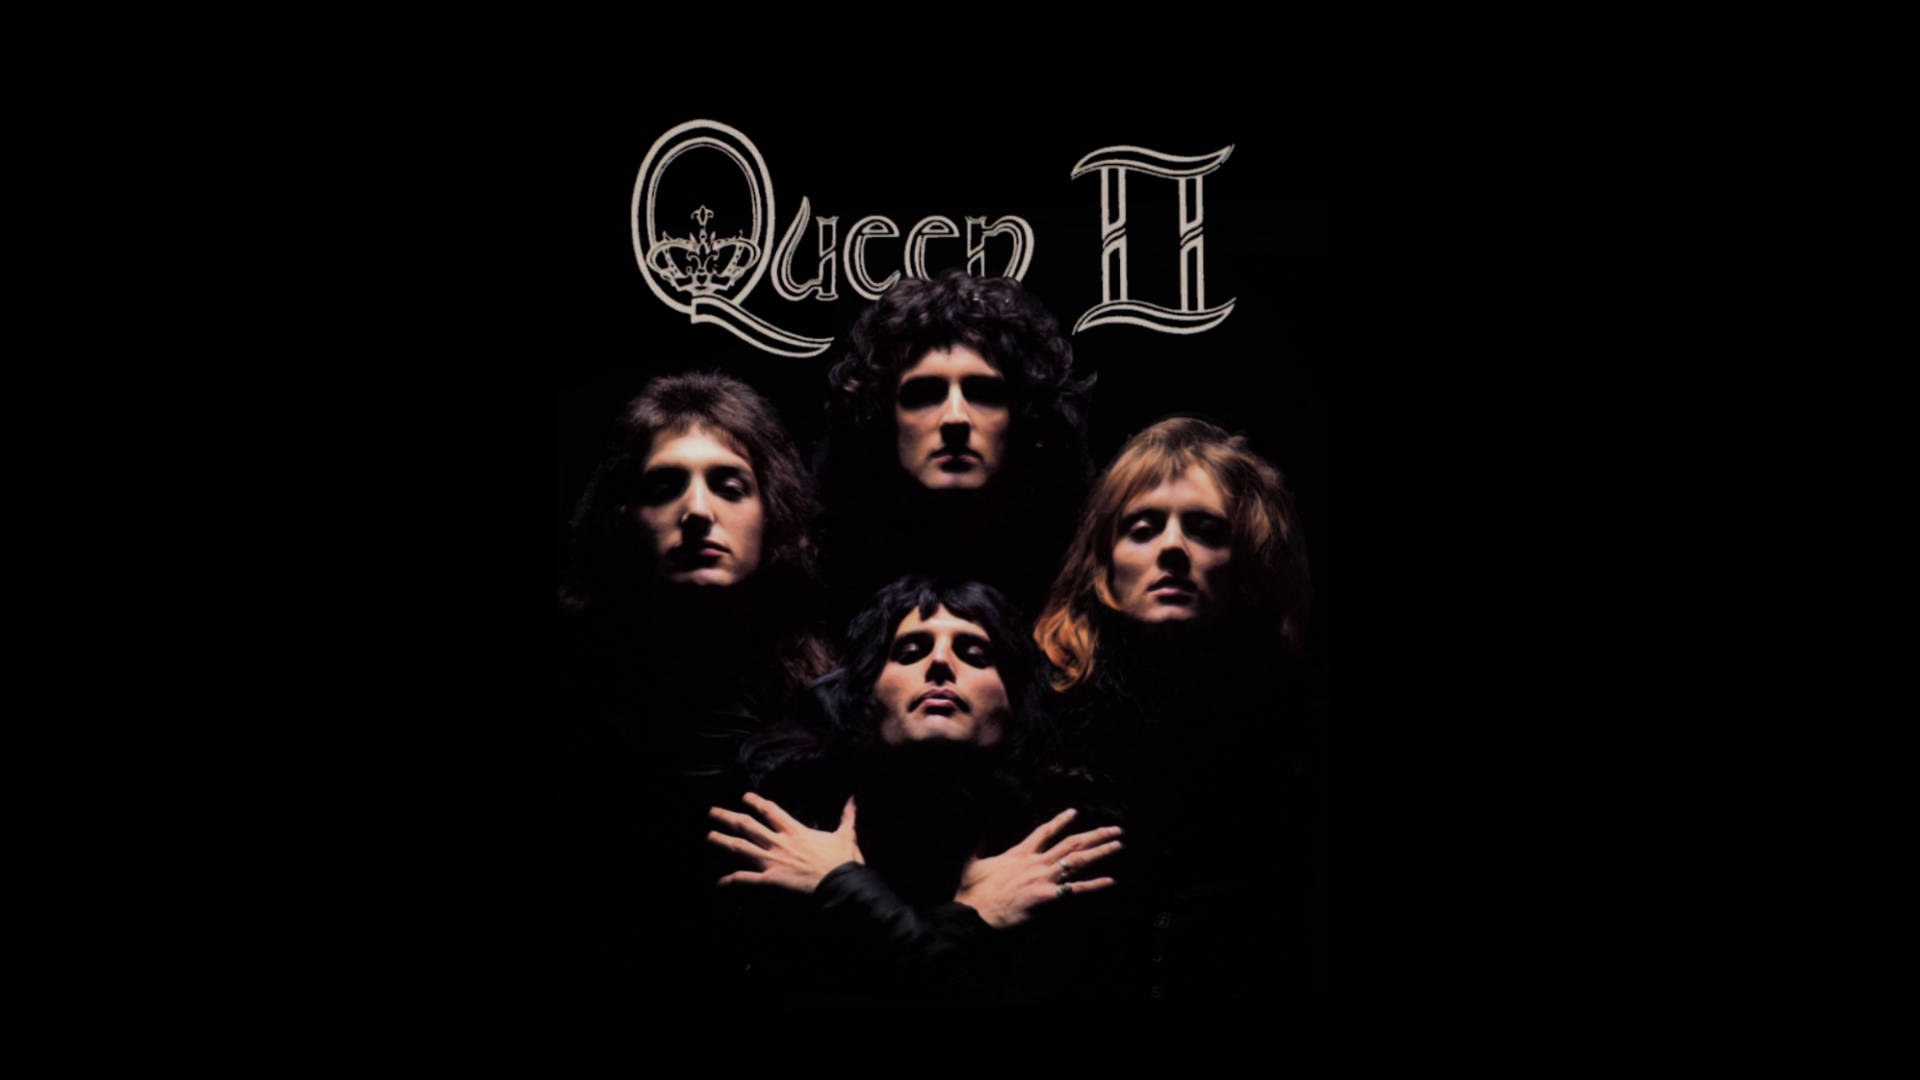 1920X1080 Queen Wallpaper and Background